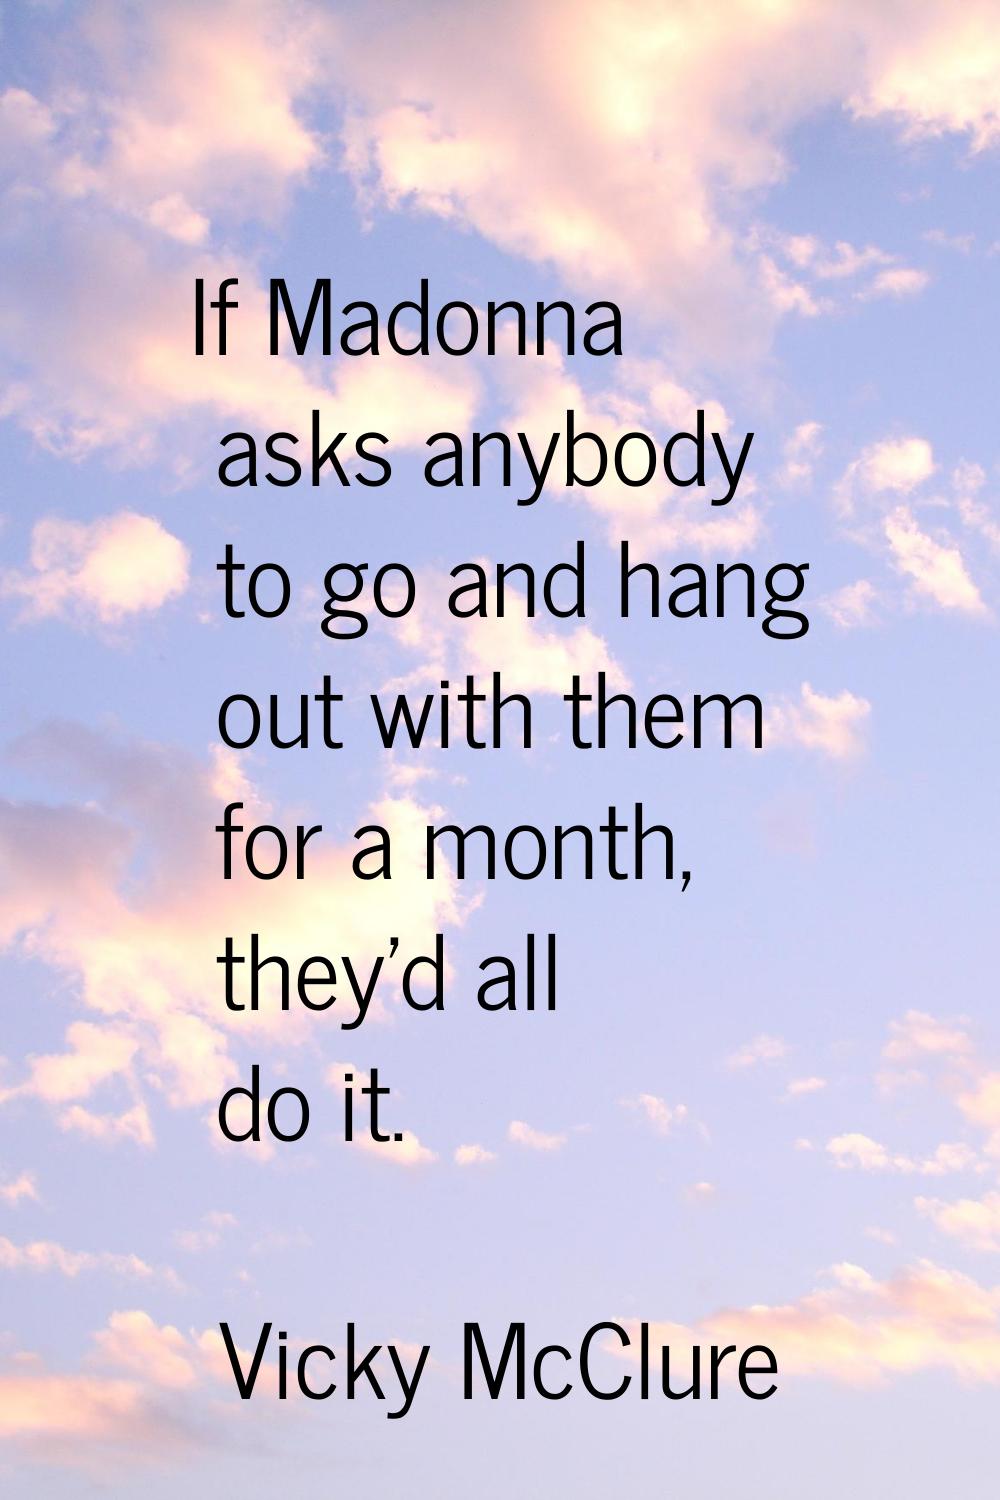 If Madonna asks anybody to go and hang out with them for a month, they'd all do it.